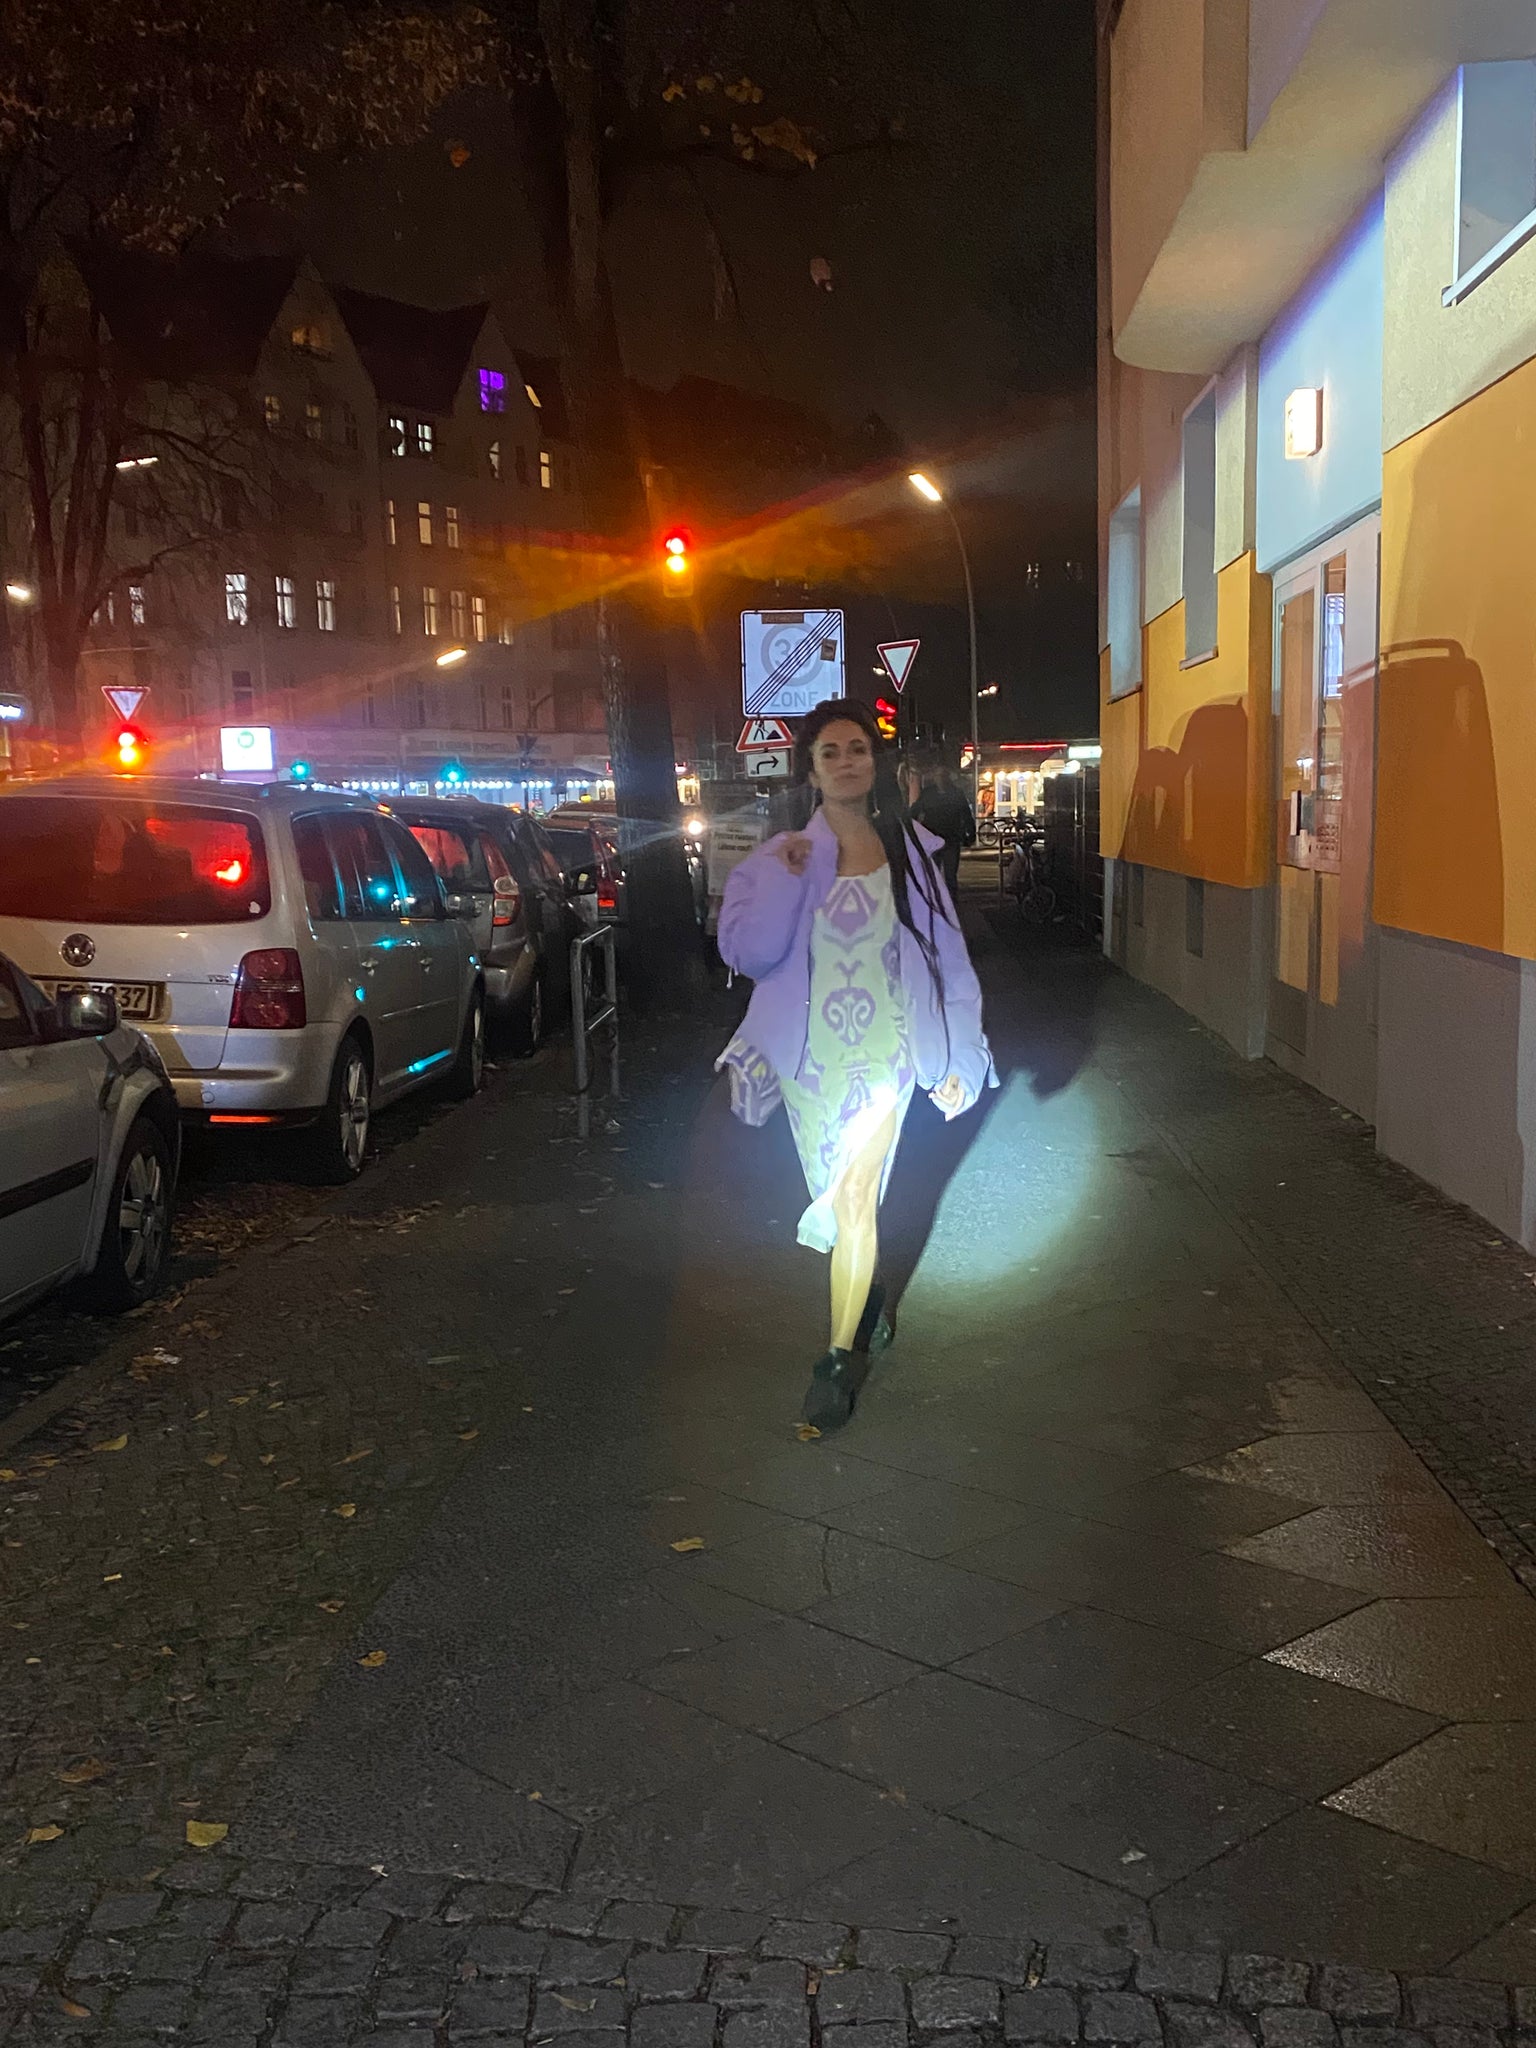 A woman in white and lavender walks a Berlin city street at night.